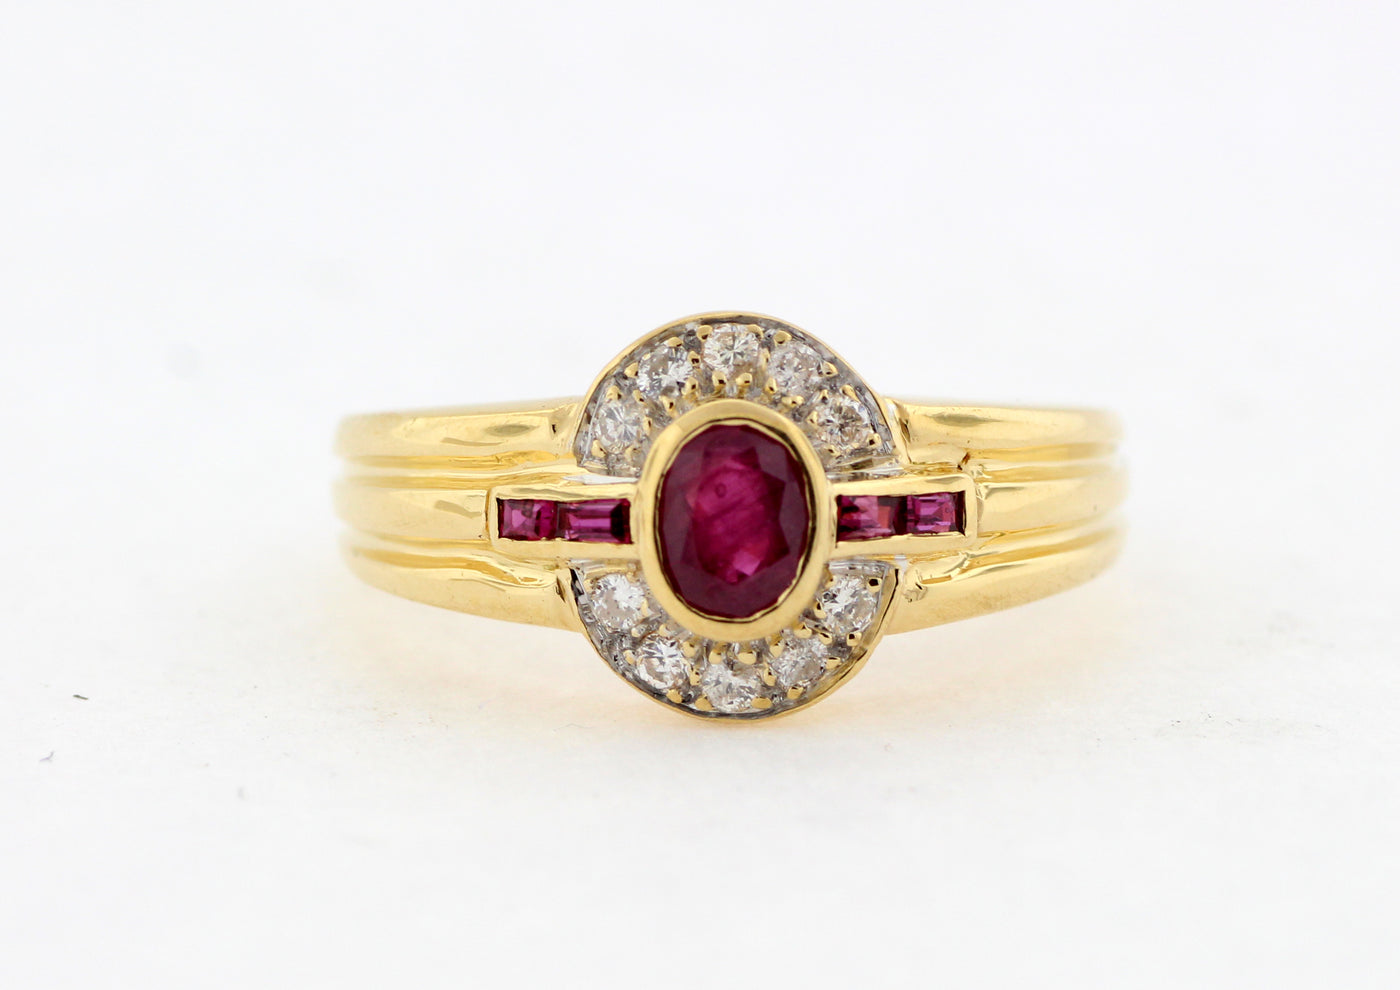 ESTATE 18KY .40 CT RUBY AND DIAMOND RING .24 CTTW